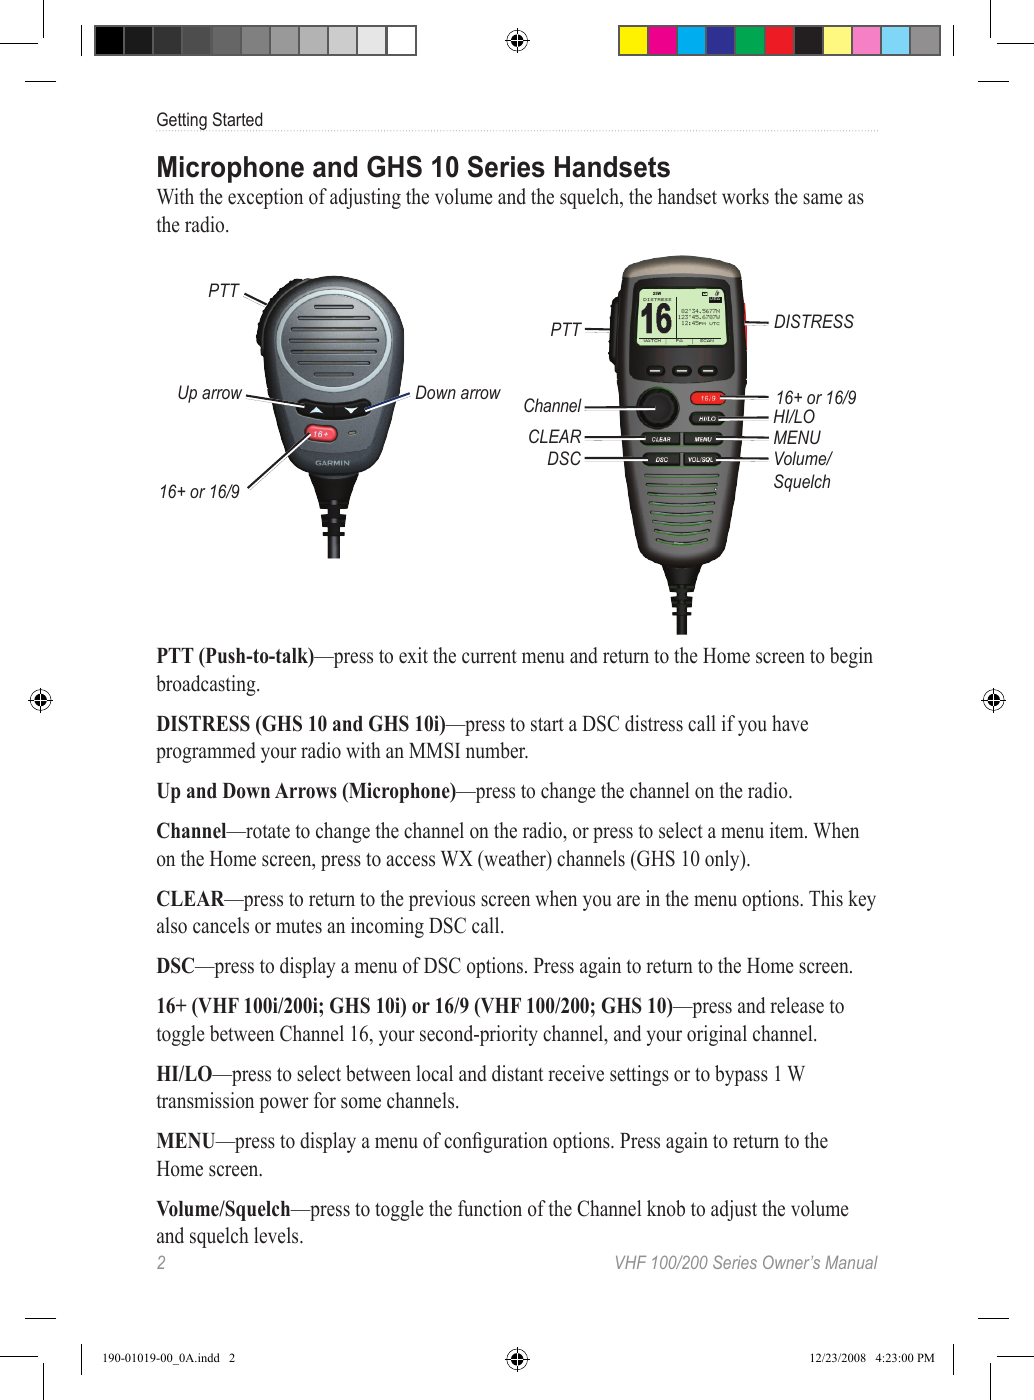 2  VHF 100/200 Series Owner’s ManualGetting StartedMicrophone and GHS 10 Series HandsetsWith the exception of adjusting the volume and the squelch, the handset works the same as the radio.PTTUp arrow16+ or 16/9Down arrowPTTChannelCLEARDSC16+ or 16/9HI/LOMENUVolume/SquelchUSA16 DISTRESSWATCH  PA SCAN“‰°Š‹.Œ‘’’ƒˆ‰Š°‹Œ.‘’“’†ˆ‰:‹ŒPM UTCW25DISTRESSPTT (Push-to-talk)—press to exit the current menu and return to the Home screen to begin broadcasting.DISTRESS (GHS 10 and GHS 10i)—press to start a DSC distress call if you have programmed your radio with an MMSI number.Up and Down Arrows (Microphone)—press to change the channel on the radio.Channel—rotate to change the channel on the radio, or press to select a menu item. When on the Home screen, press to access WX (weather) channels (GHS 10 only).CLEAR—press to return to the previous screen when you are in the menu options. This key also cancels or mutes an incoming DSC call.DSC—press to display a menu of DSC options. Press again to return to the Home screen.16+ (VHF 100i/200i; GHS 10i) or 16/9 (VHF 100/200; GHS 10)—press and release to toggle between Channel 16, your second-priority channel, and your original channel.HI/LO—press to select between local and distant receive settings or to bypass 1 W transmission power for some channels.MENU—press to display a menu of conguration options. Press again to return to the Home screen.Volume/Squelch—press to toggle the function of the Channel knob to adjust the volume and squelch levels.190-01019-00_0A.indd   2 12/23/2008   4:23:00 PM